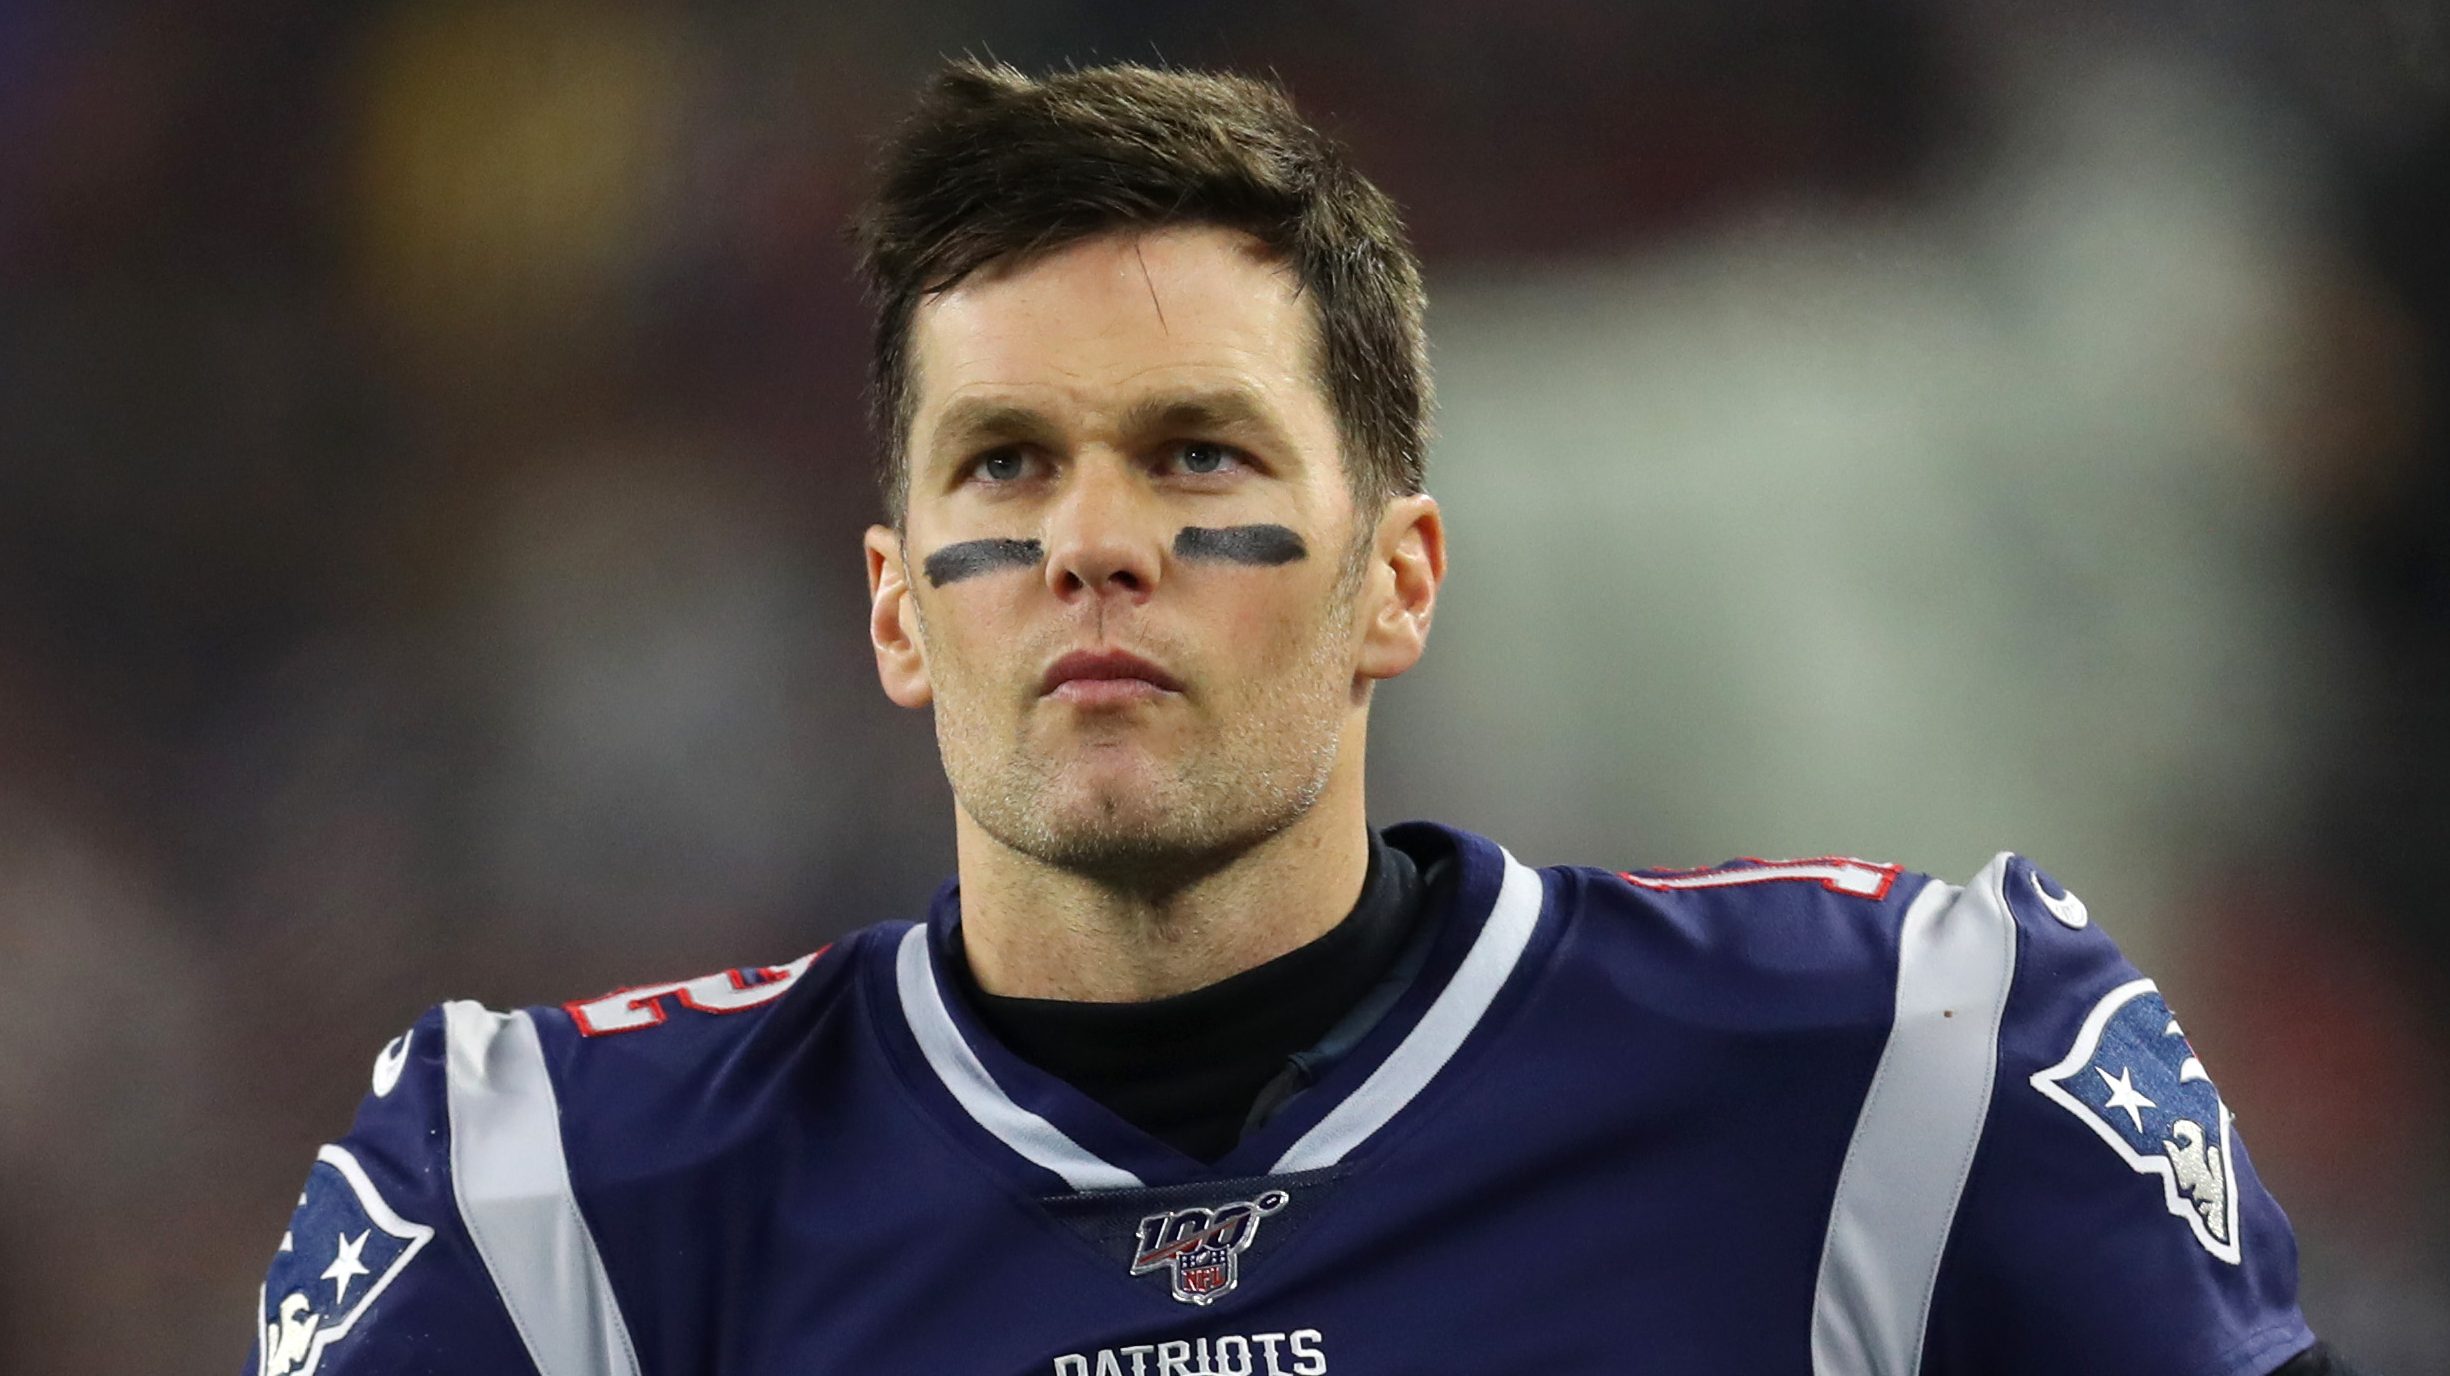 Patriots to honor Tom Brady at home opener in retired QB's return